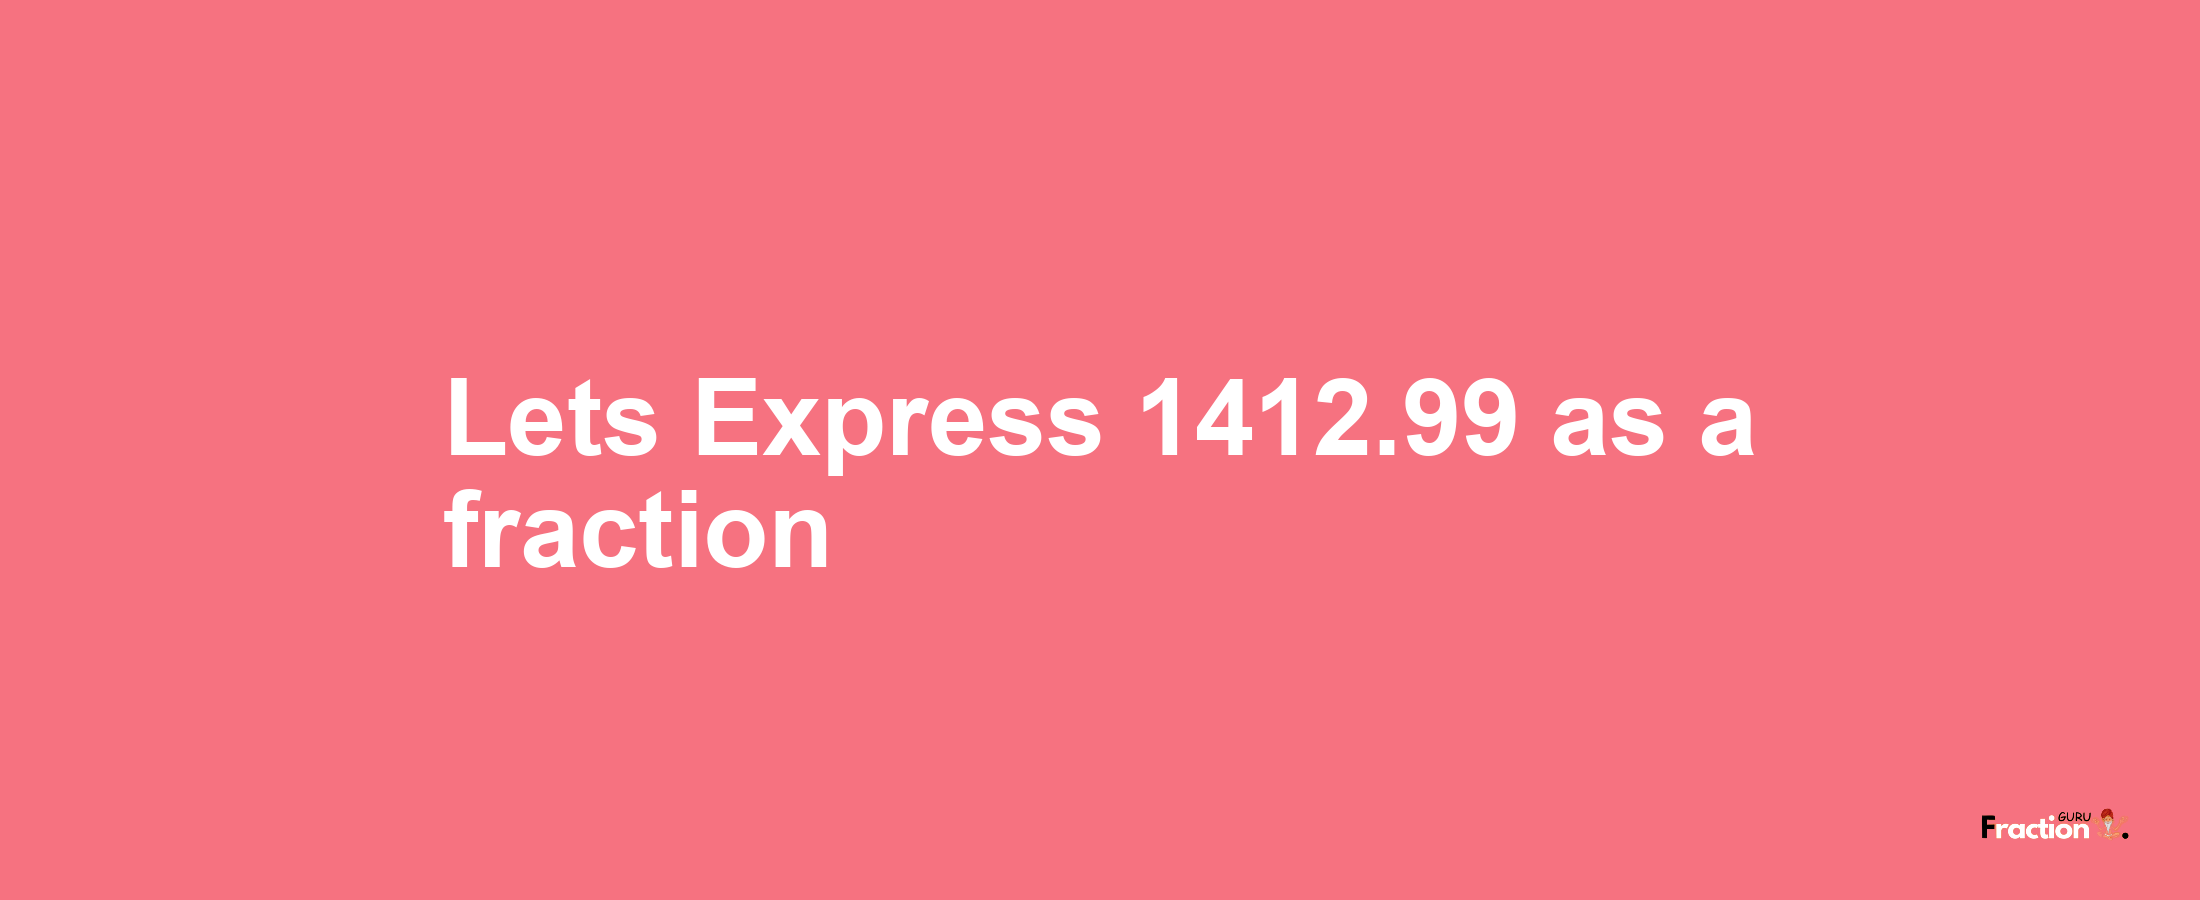 Lets Express 1412.99 as afraction